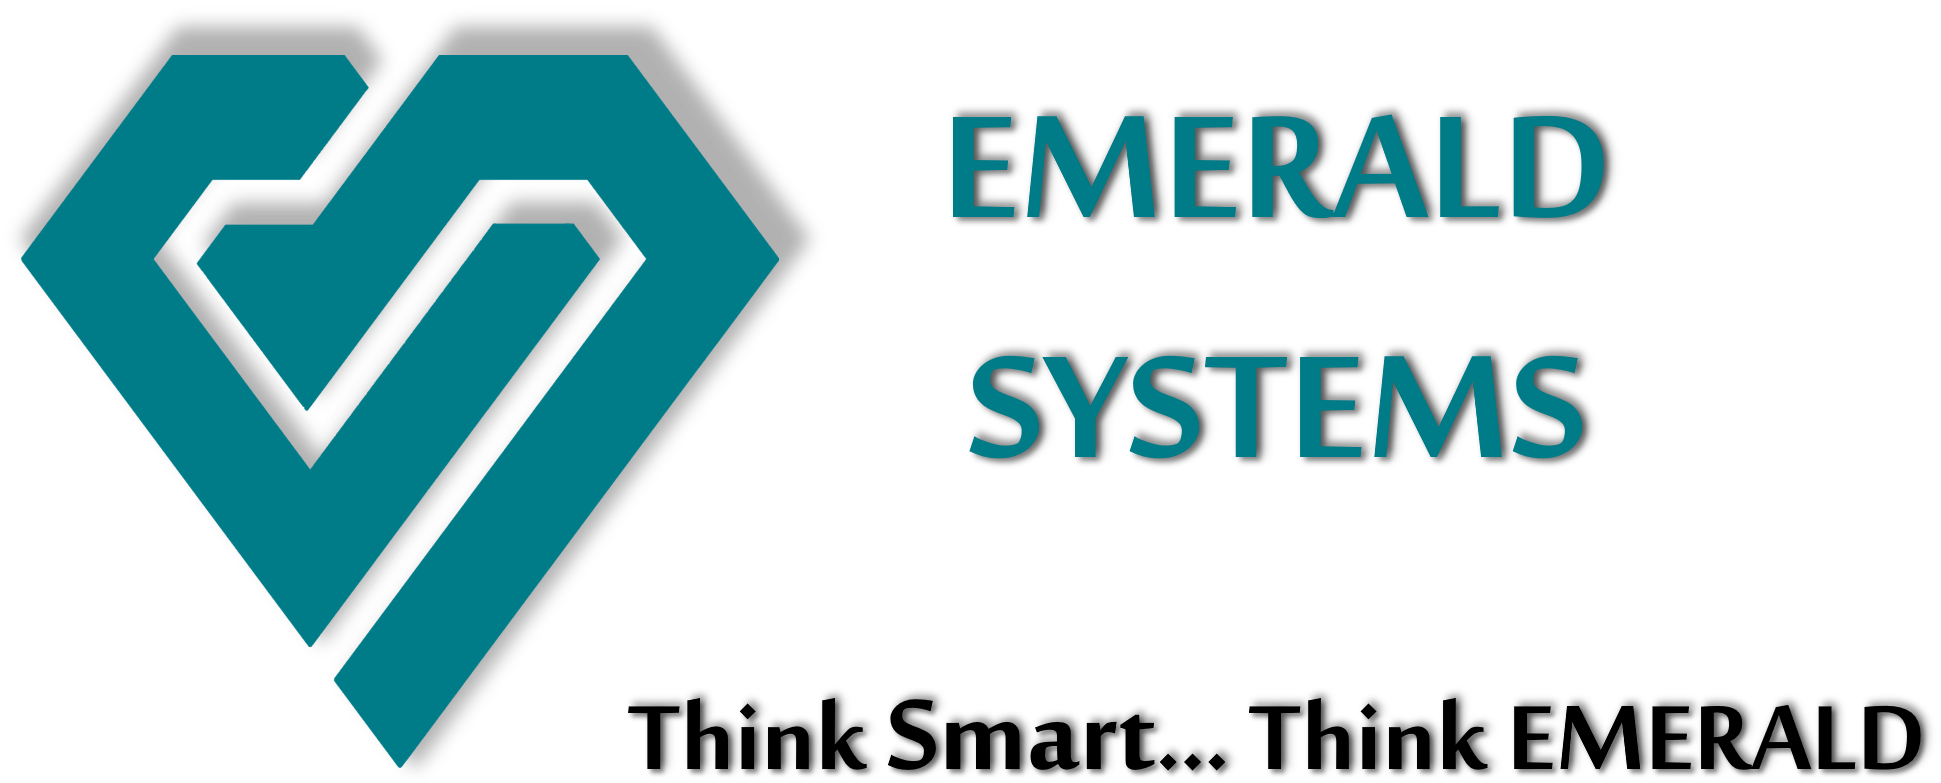 Emerald Systems